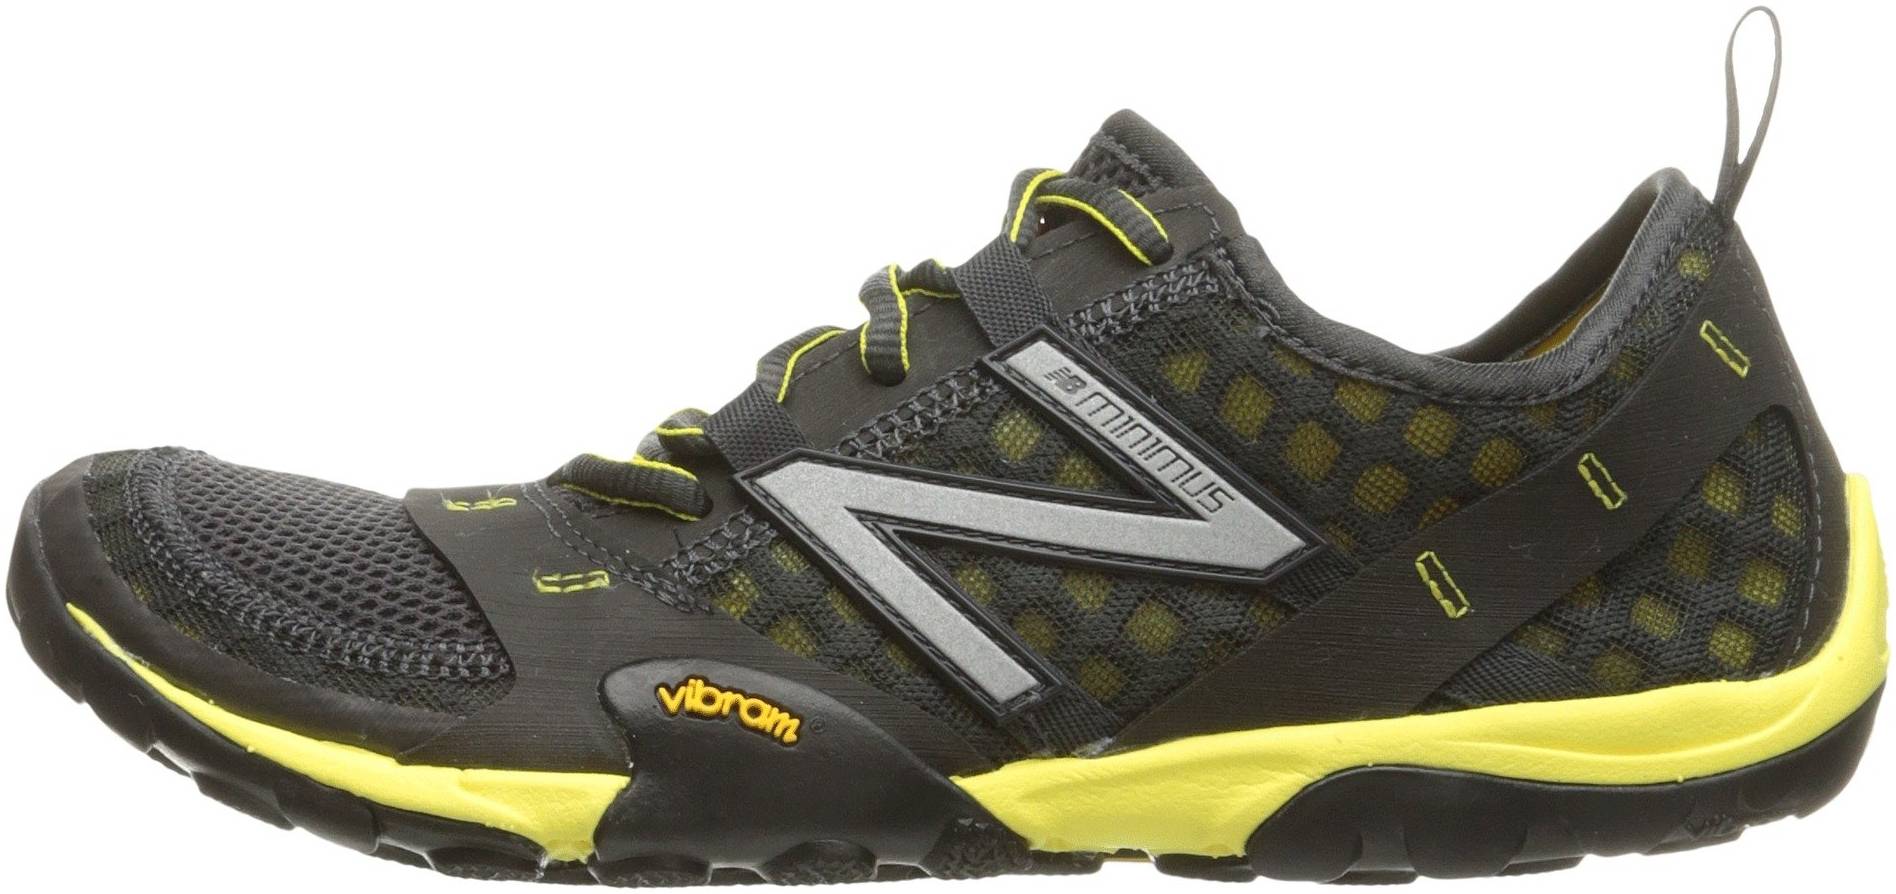 13 Reasons to/NOT to Buy New Balance Minimus 10 v1 (May 2022 ... بروتينات طبيعية